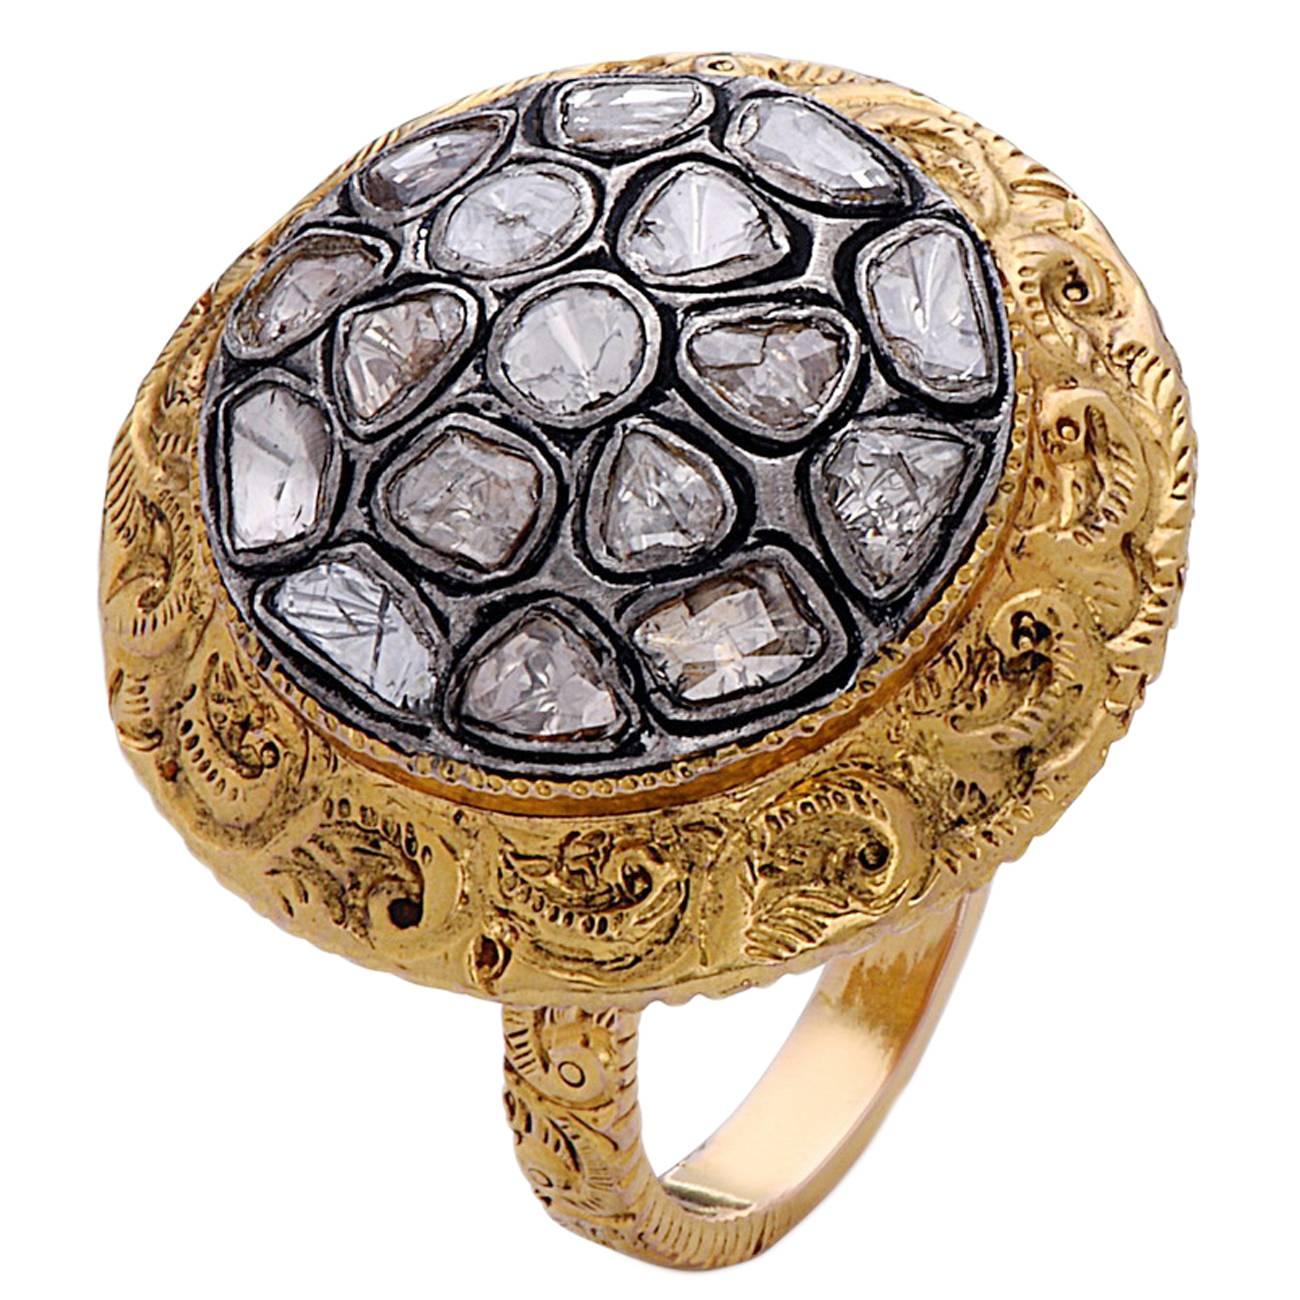 Hand-Carved Royal Looking Rose Cut Diamond Gold Ring